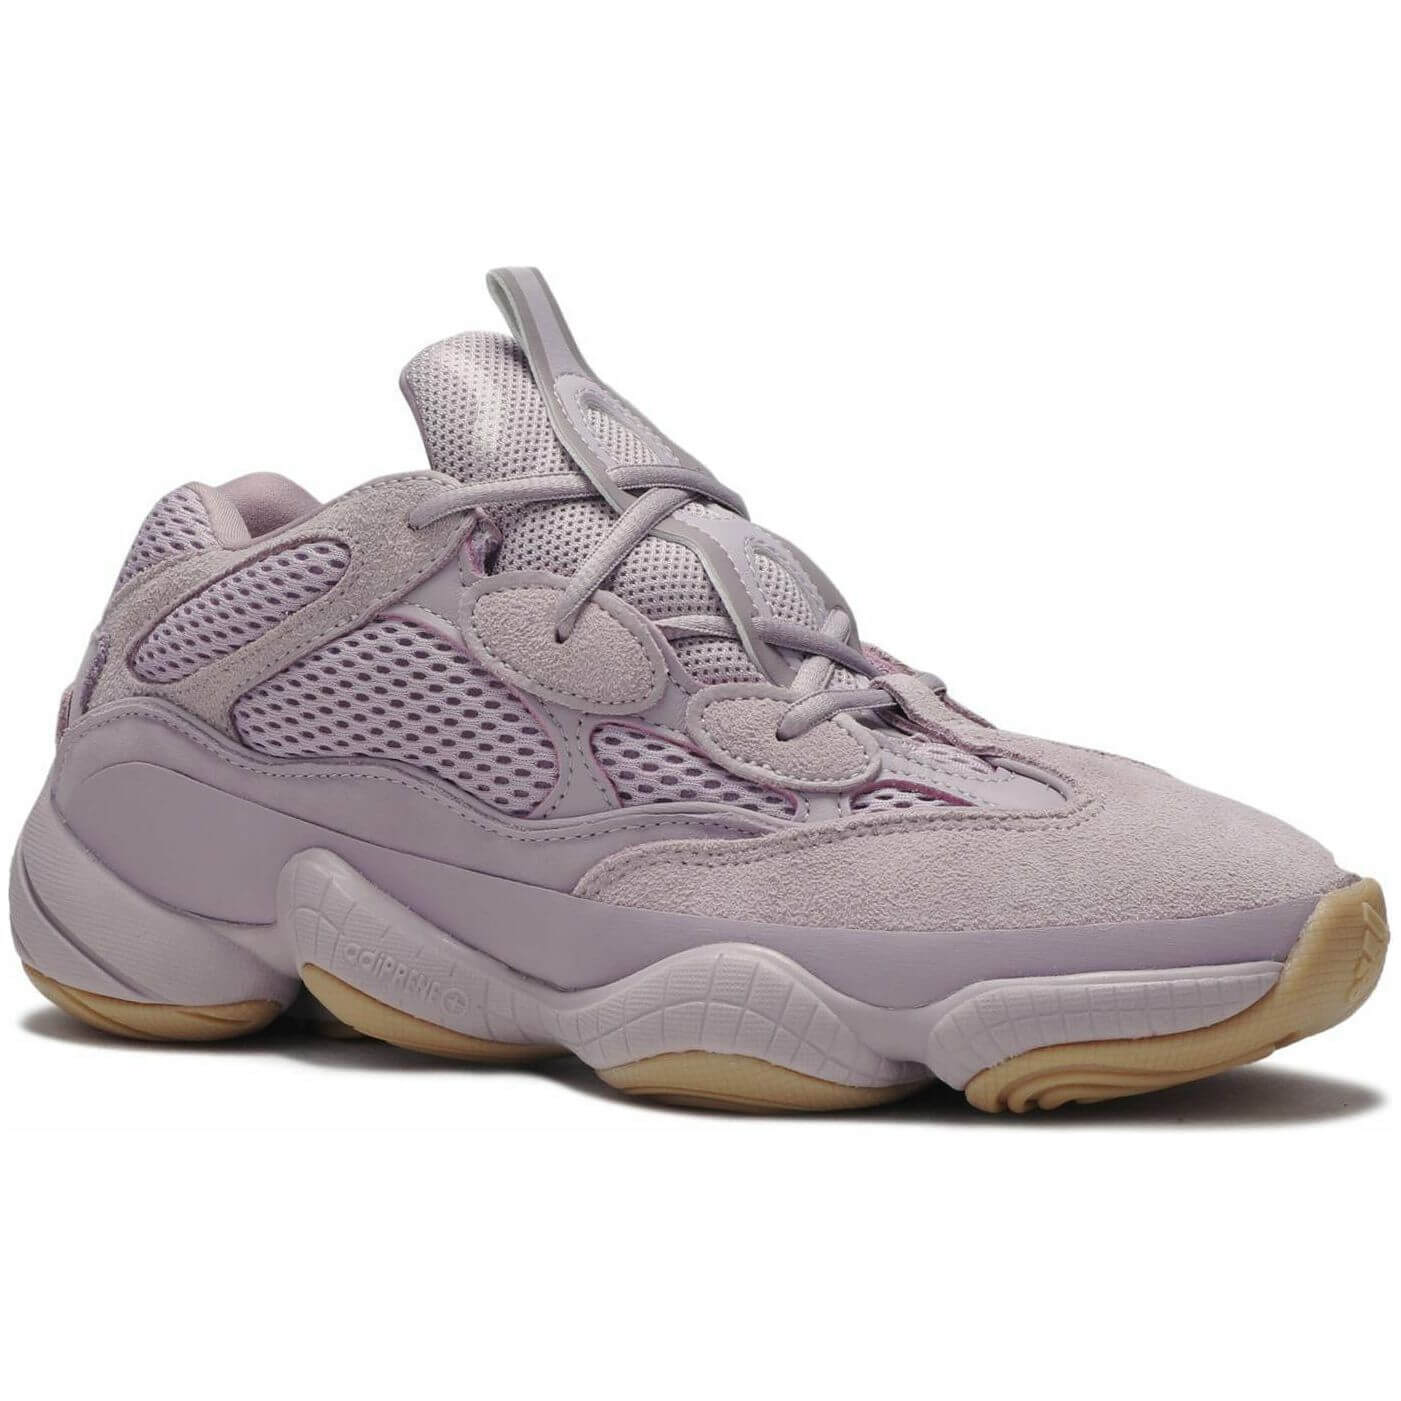 Adidas Yeezy 500 Soft Vision from Yeezy